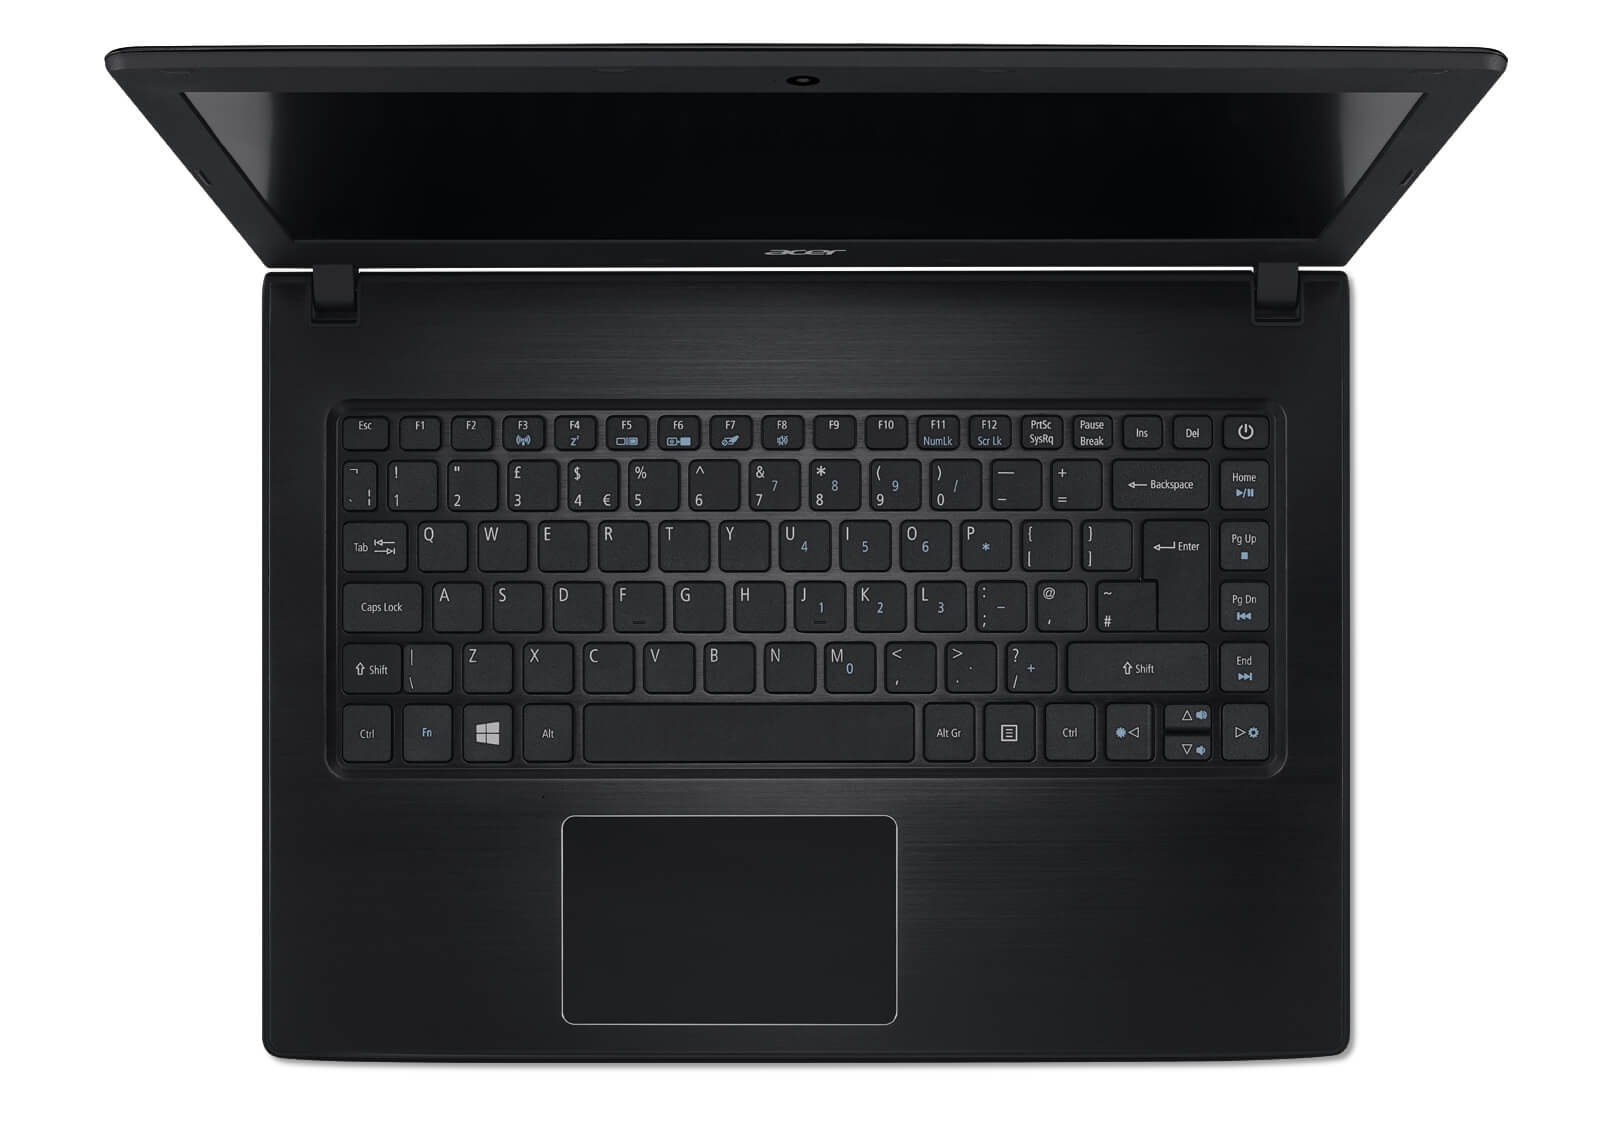 Notebook Acer TravelMate P249 and P259